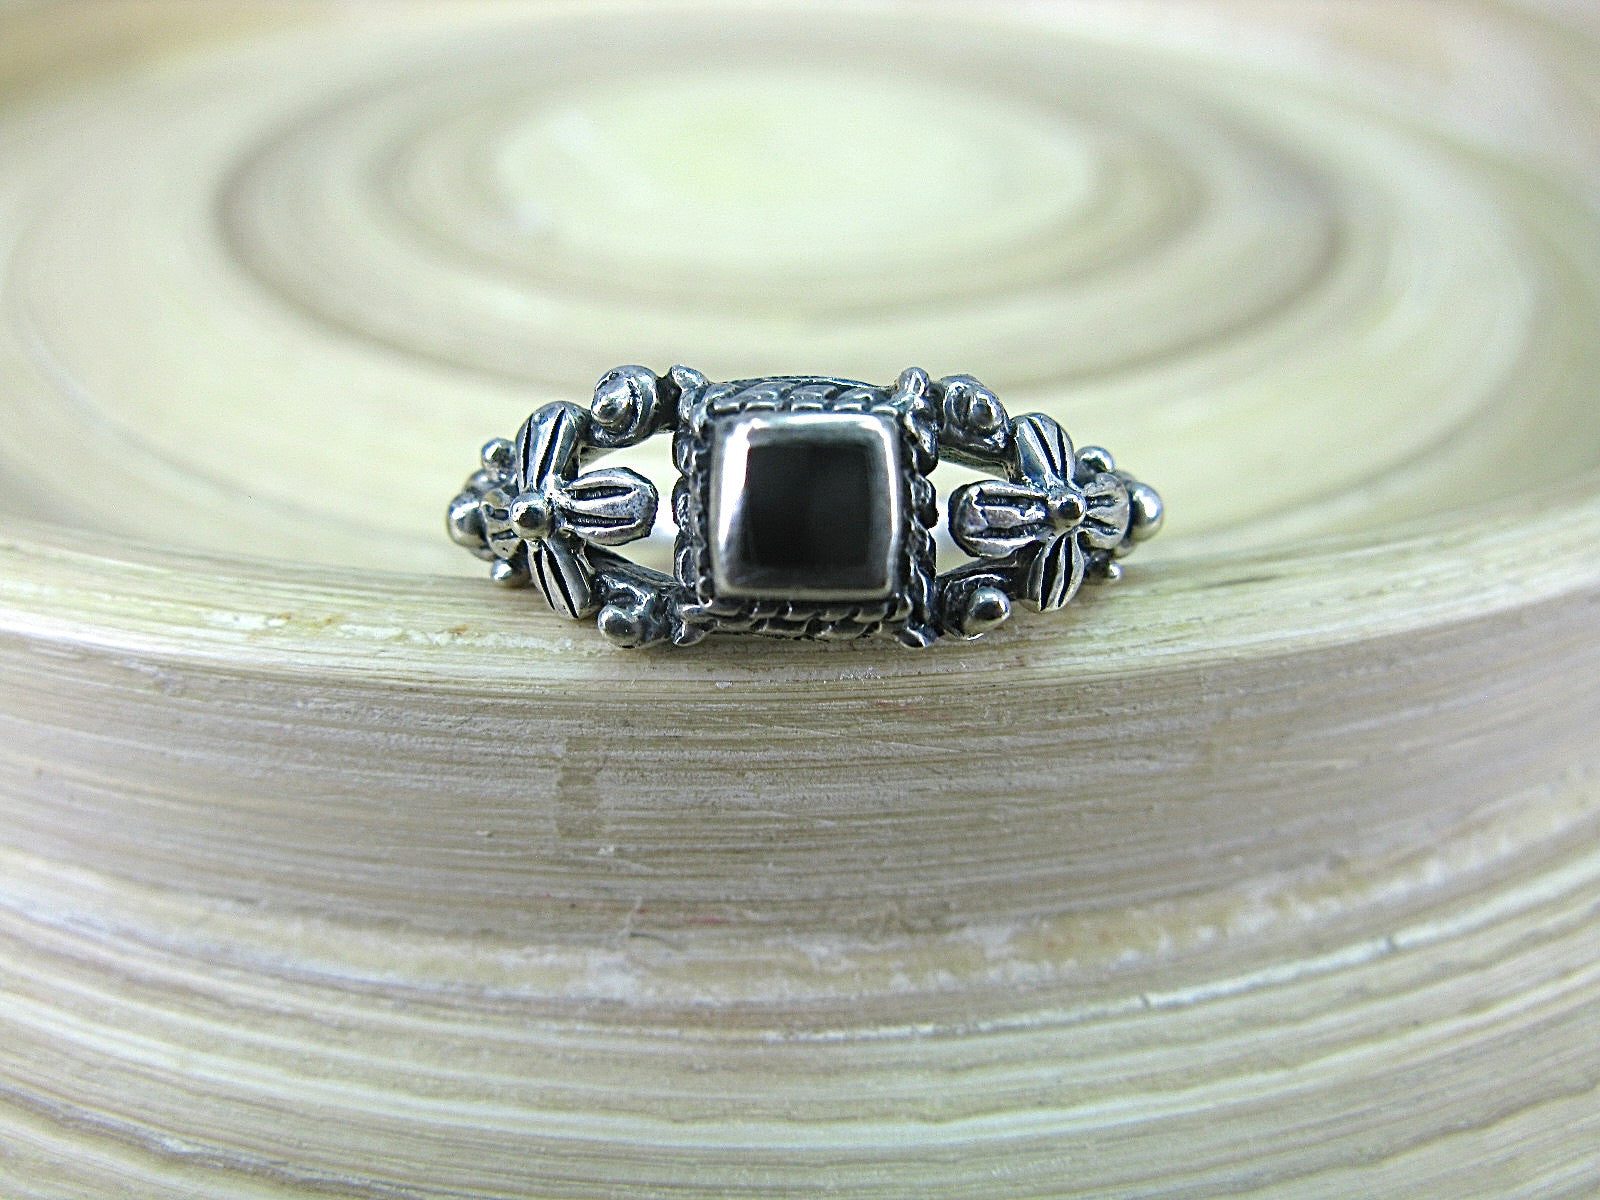 Onyx Square Oxidized 925 Sterling Silver Ring Ring Faith Owl - Faith Owl